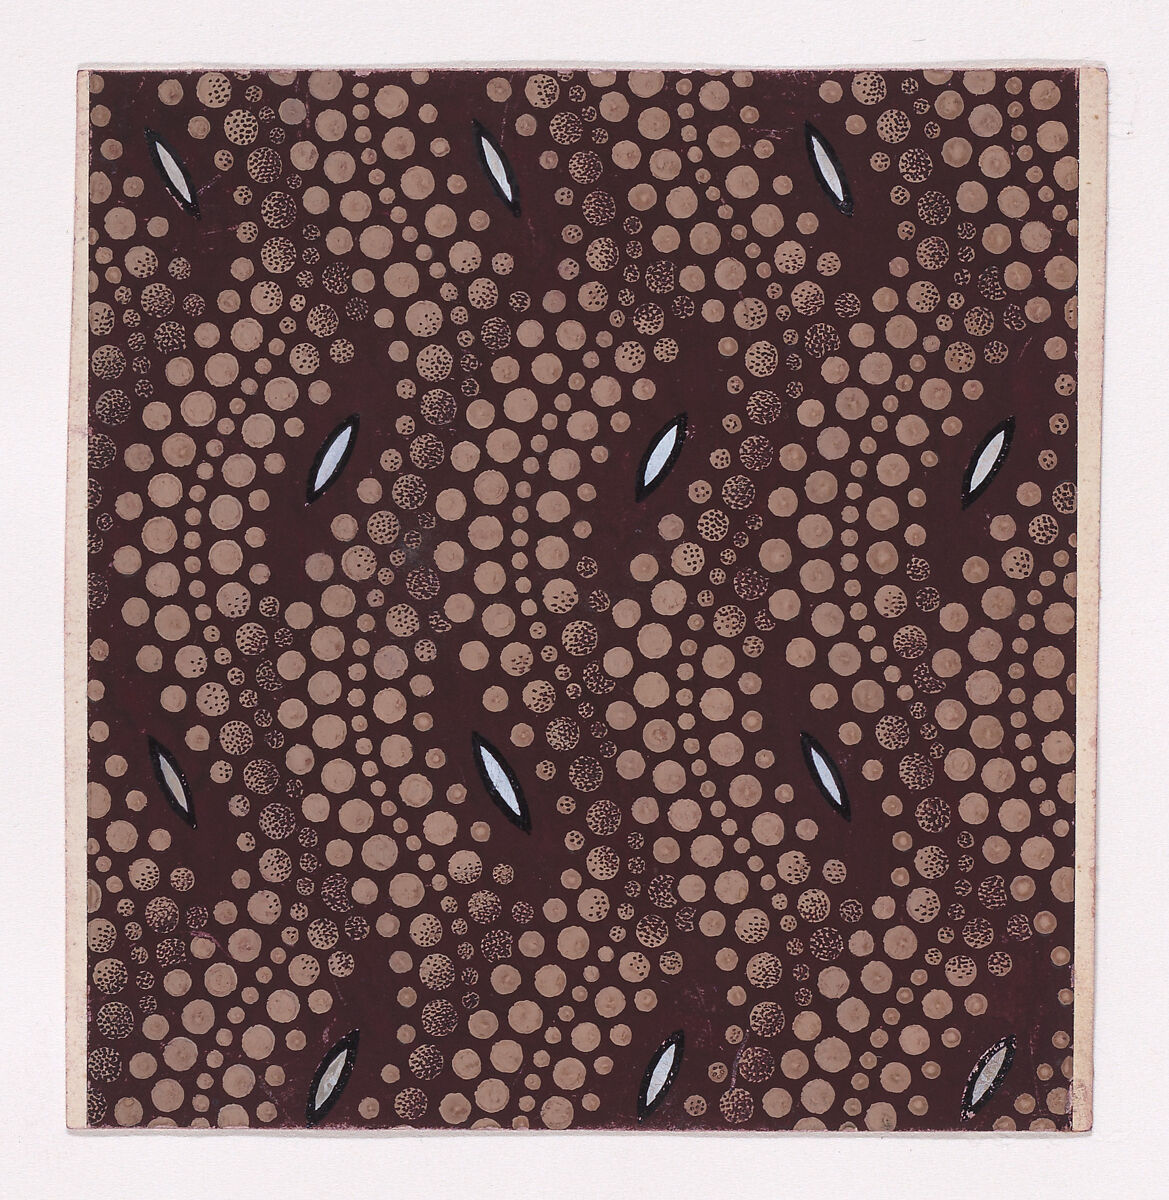 Textile Design with Overlapping Groups of Five Undulating Vertical Stripes of Pearls and Shuttle-Shaped Motifs, Anonymous, Alsatian, 19th century, Gouache 